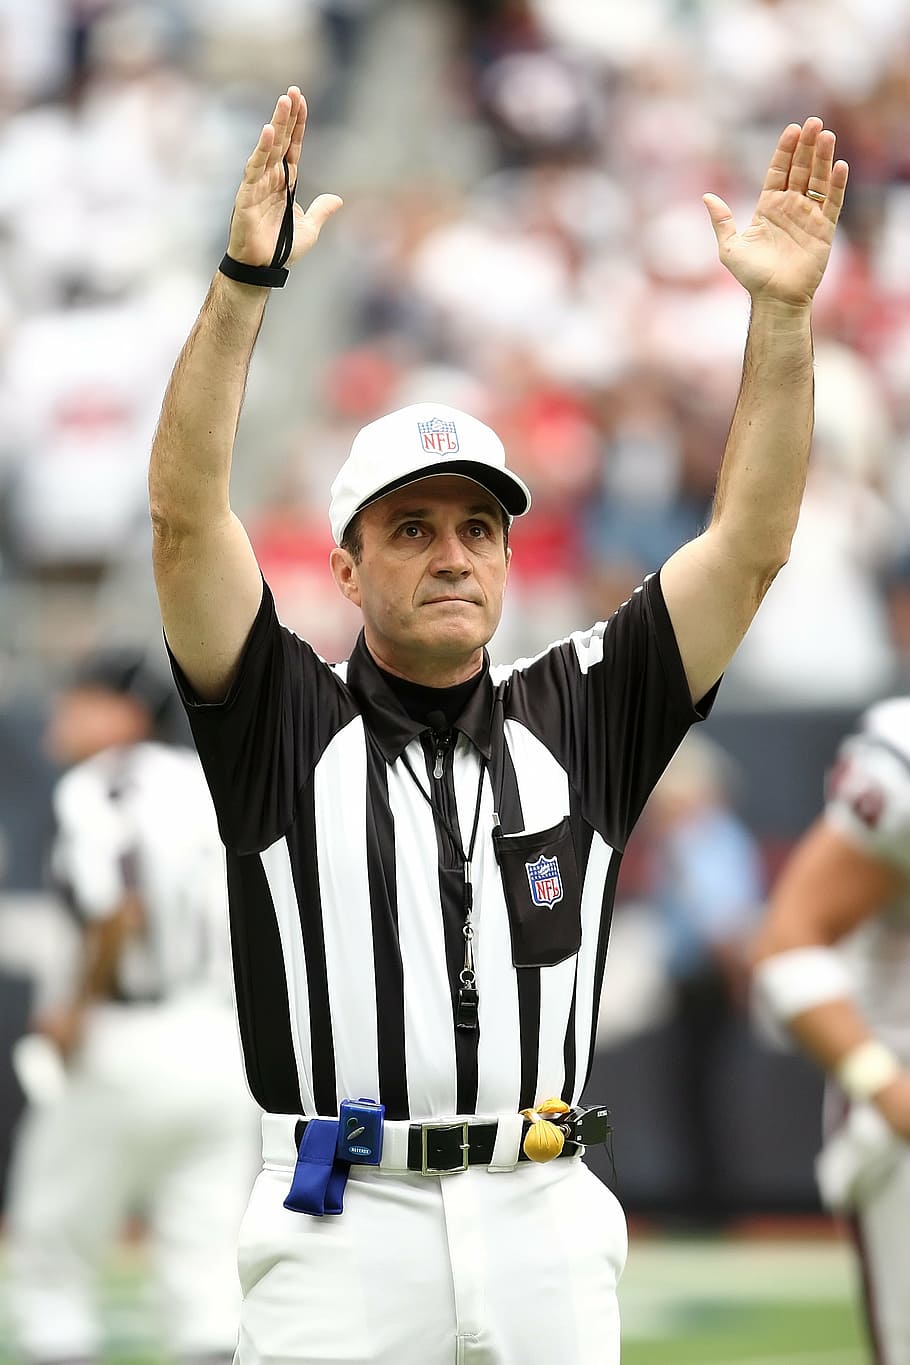 referee raising his hand, professional football, touchdown, official